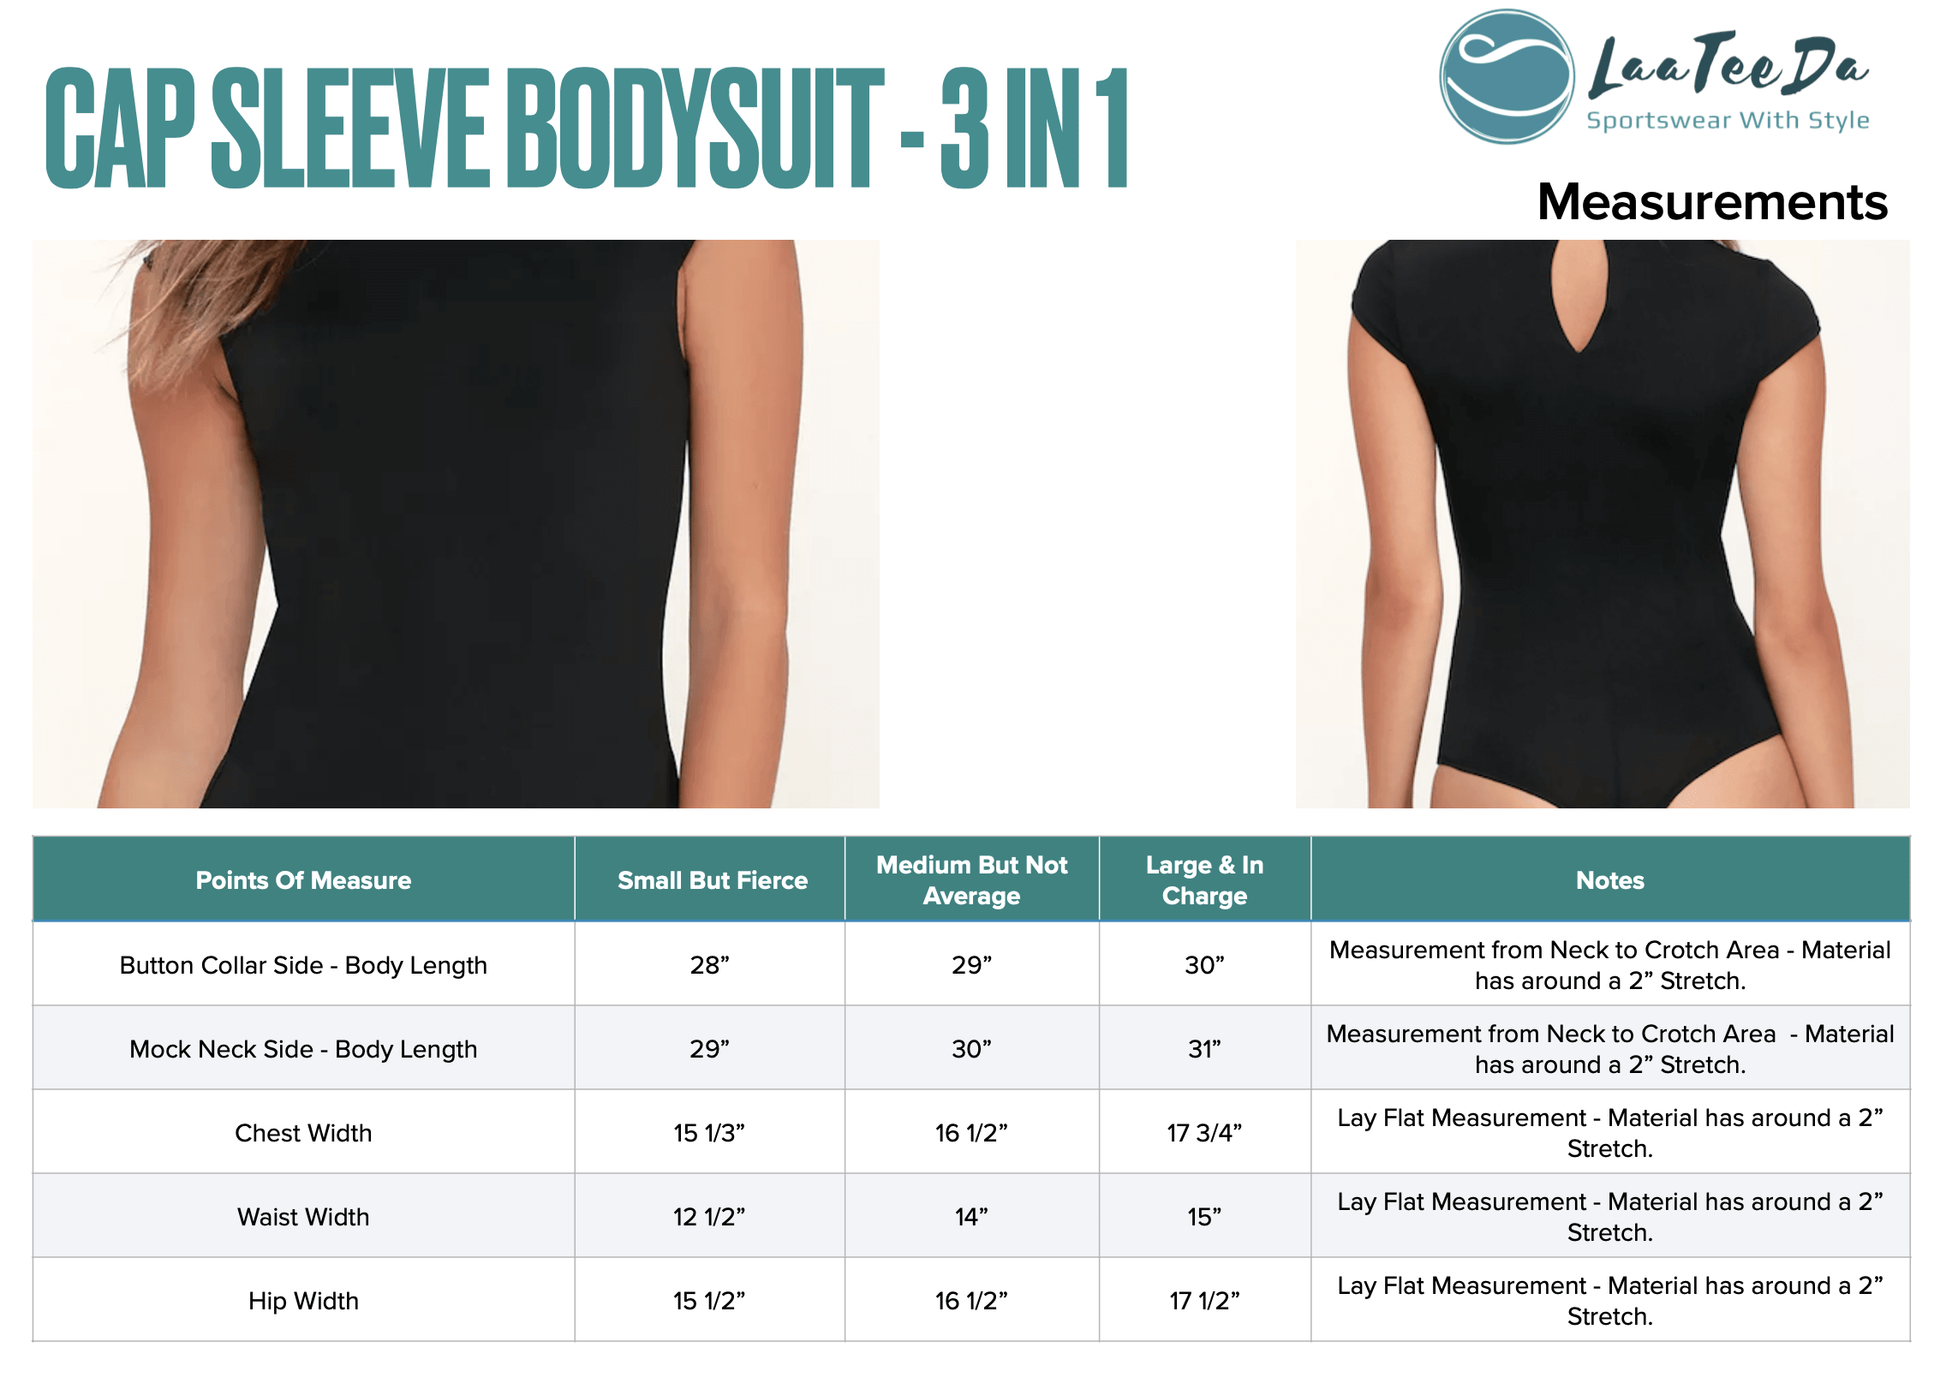 LaaTeeDa Sports Shirts LaaTeeDa Golf Bodysuit For Women with Cap Sleeve in Soft Stretchy Black Fabric, Wear 1 of 3 Ways - Open Collar, Mock Neck or Button Up Key Hole Looks In One Shirt